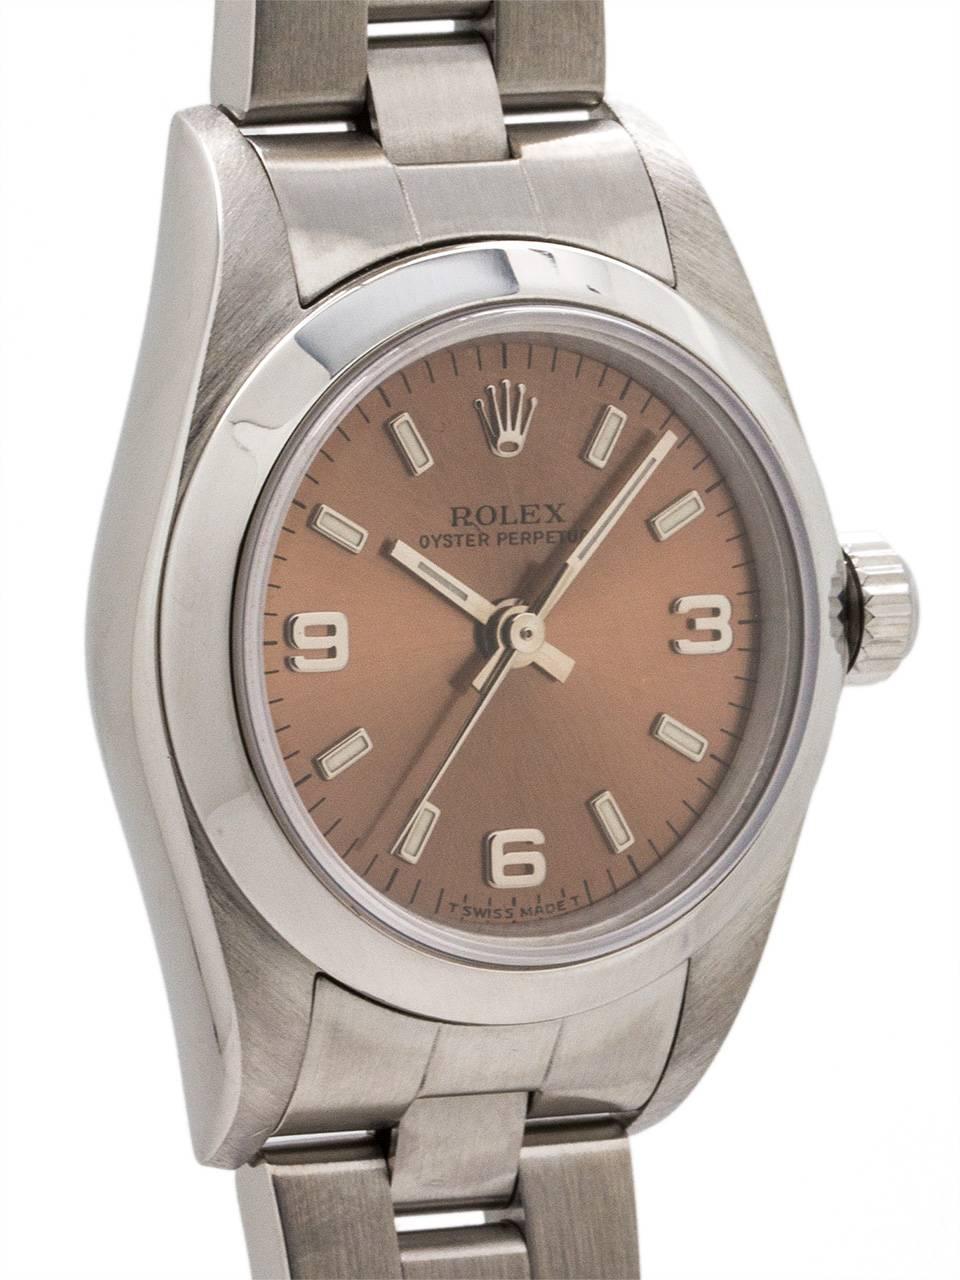 Lady Rolex Stainless Steel Oyster Perpetualref 76080 serial# A9 circa 1998. Featuring a 27mm diameter Oyster case with smooth bezel and sapphire crystal. Original salmon dial with applied silver figures and popular 3/6/9 Explorer style configuration